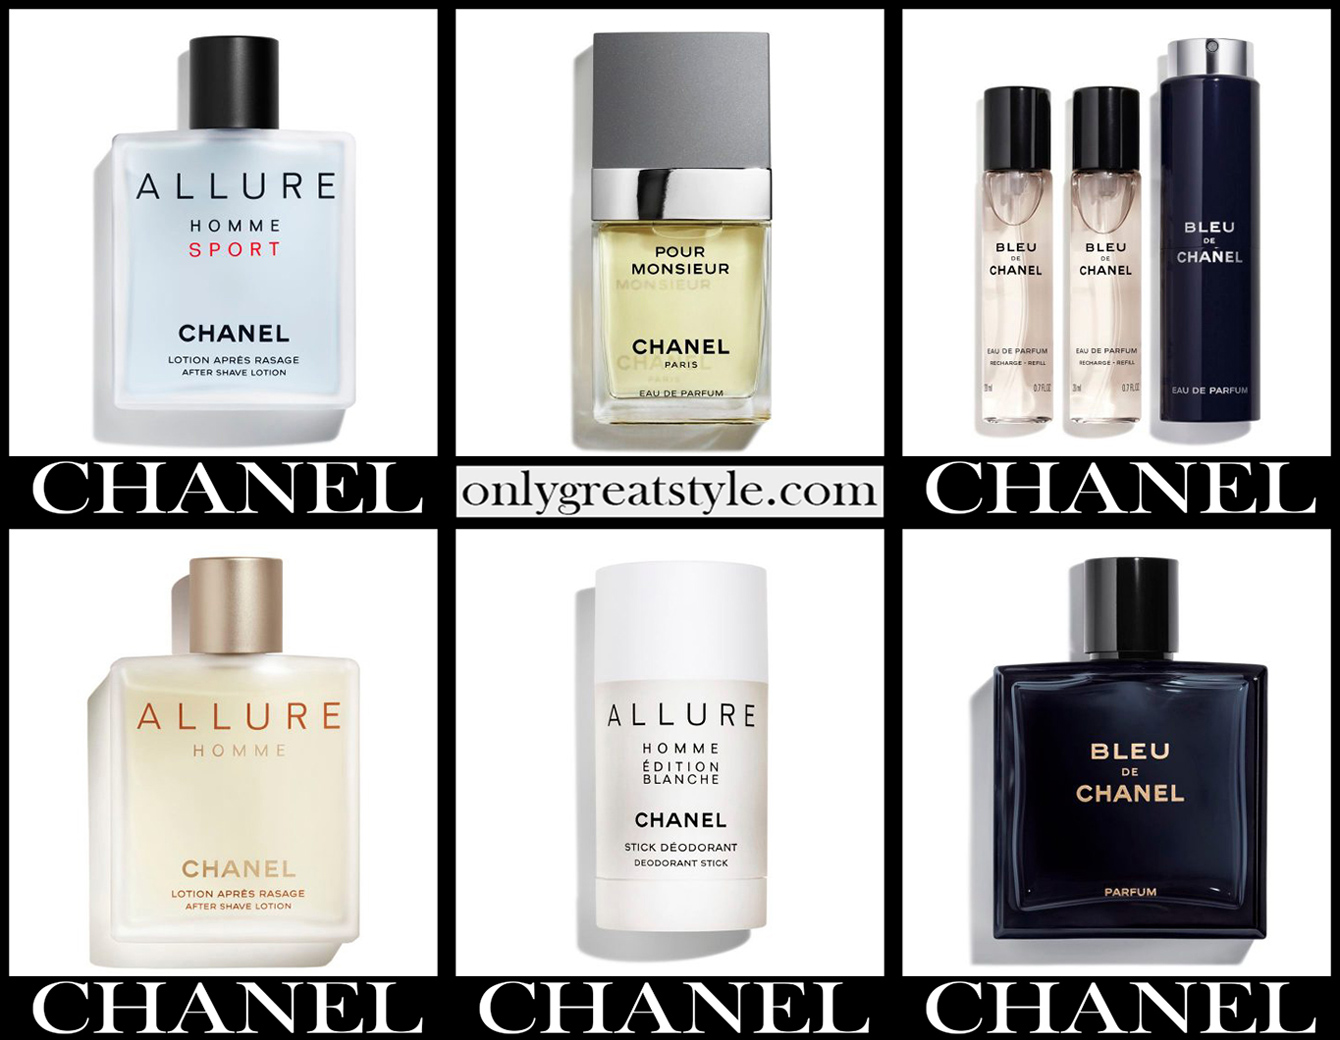 Chanel perfumes 2021 new arrivals gift ideas for men